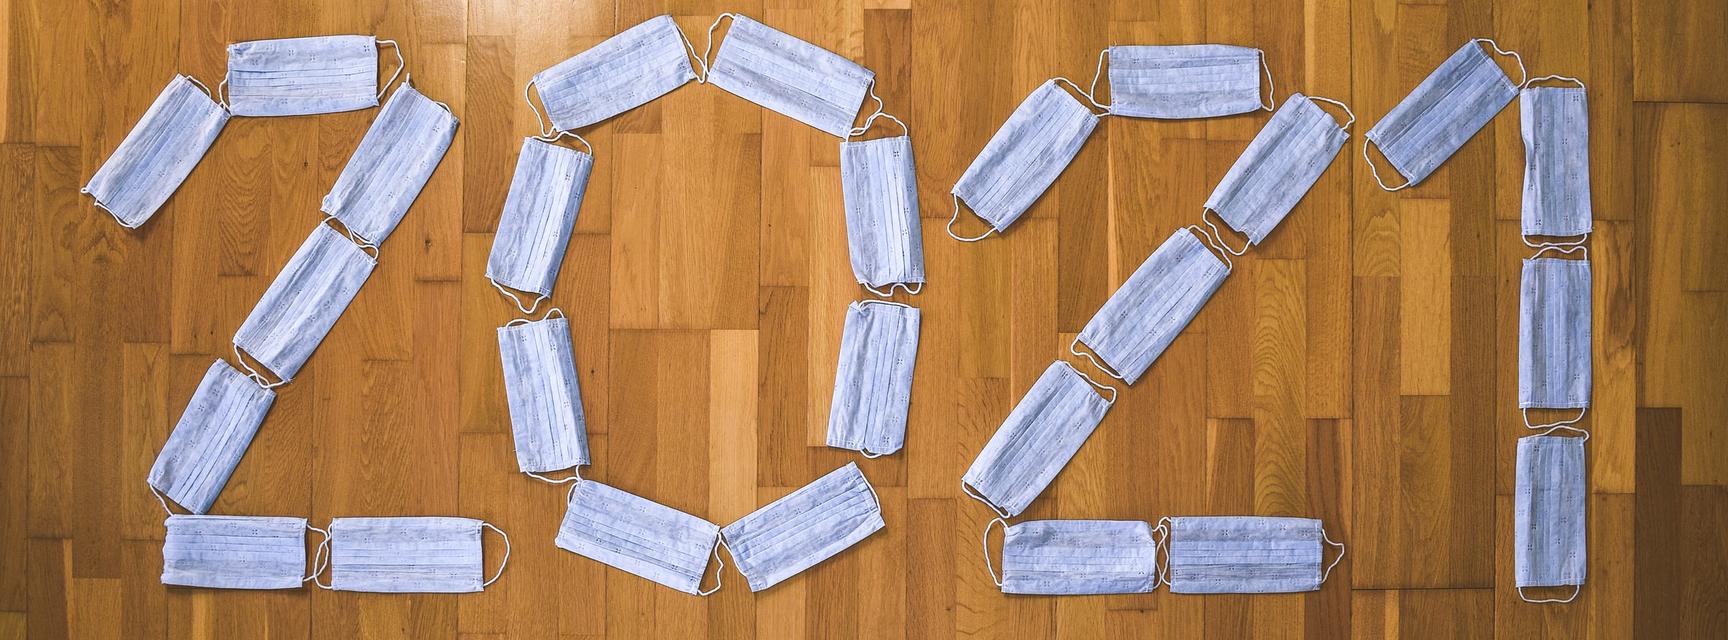 2021 spelt out with blue face masks on a wooden floor